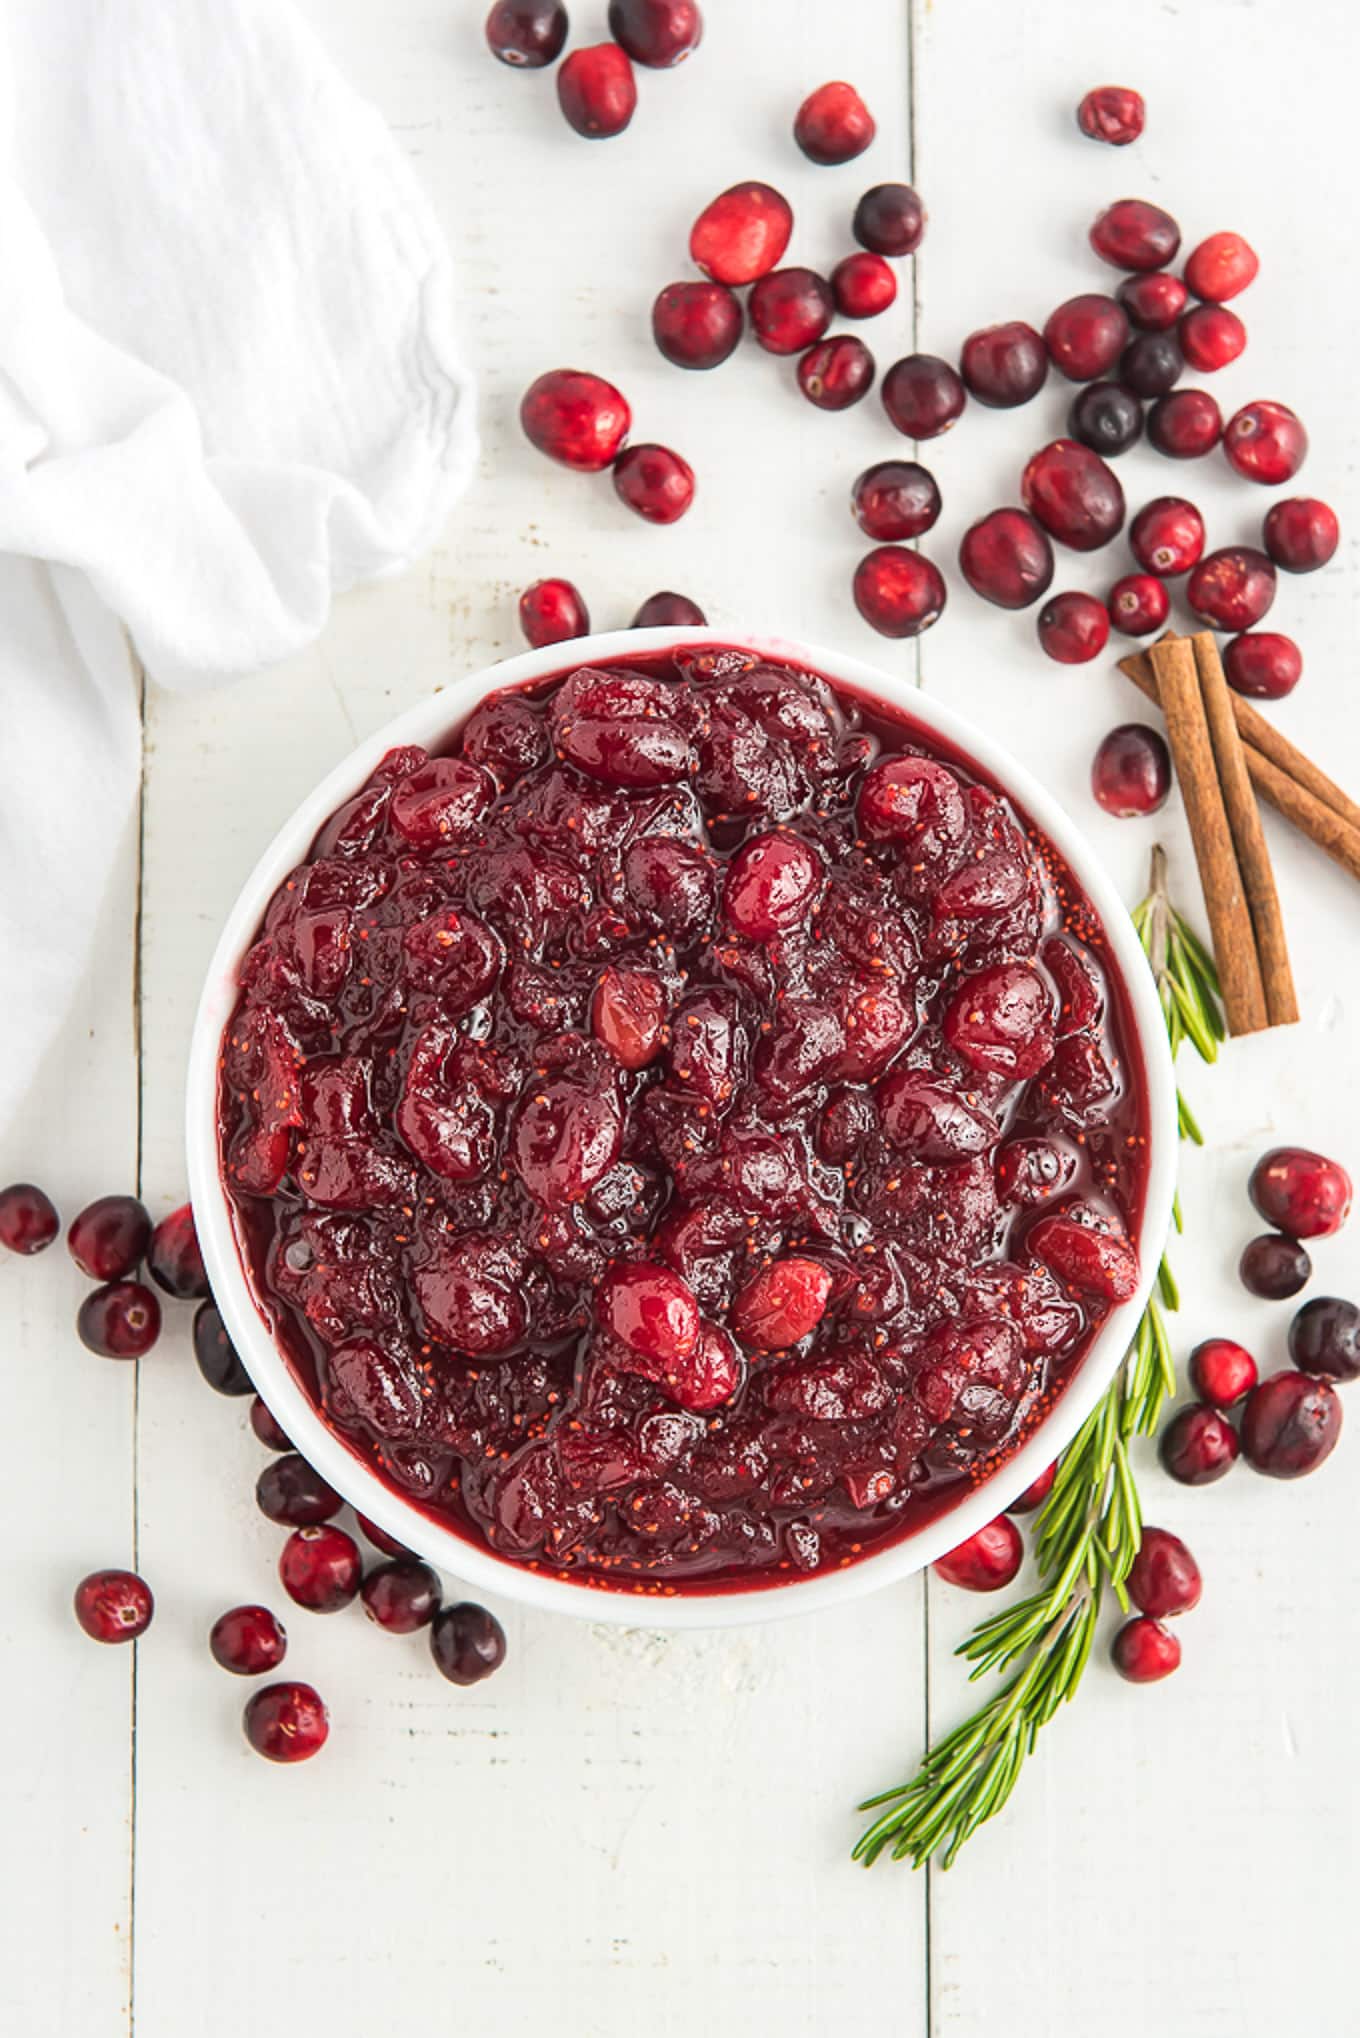 A bowl of cranberry sauce on the table with rosemary, fresh cranberries, and cinnamon sticks to the side.